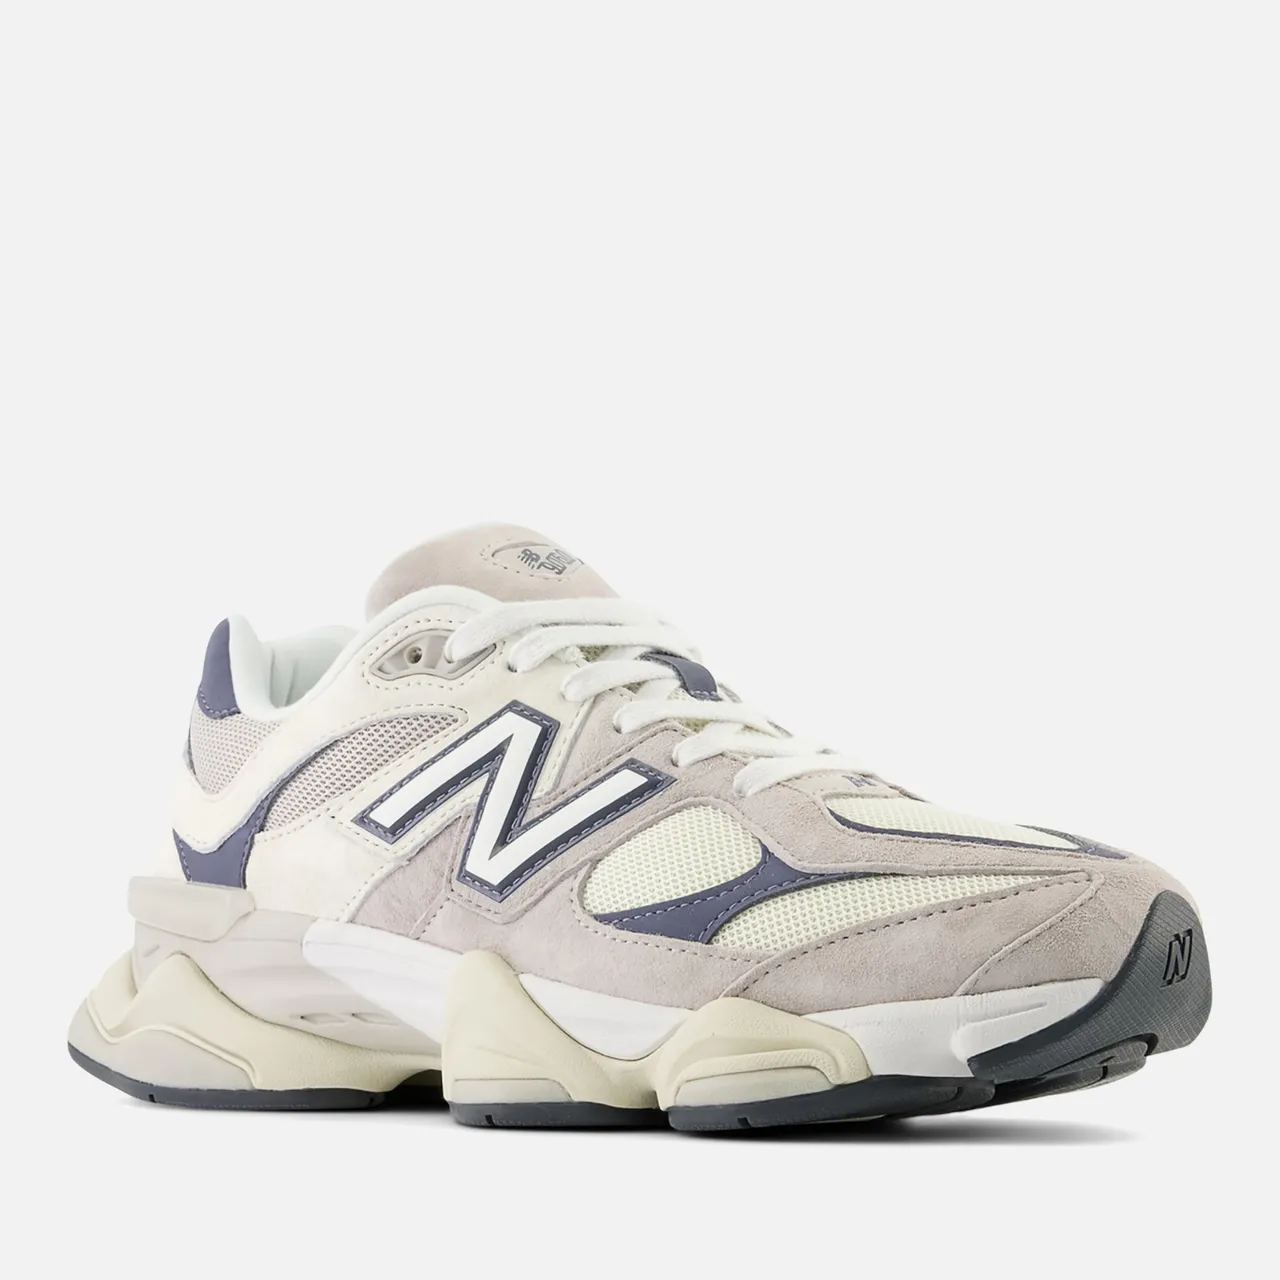 New Balance Men's 9060 Suede and Mesh Trainers - UK